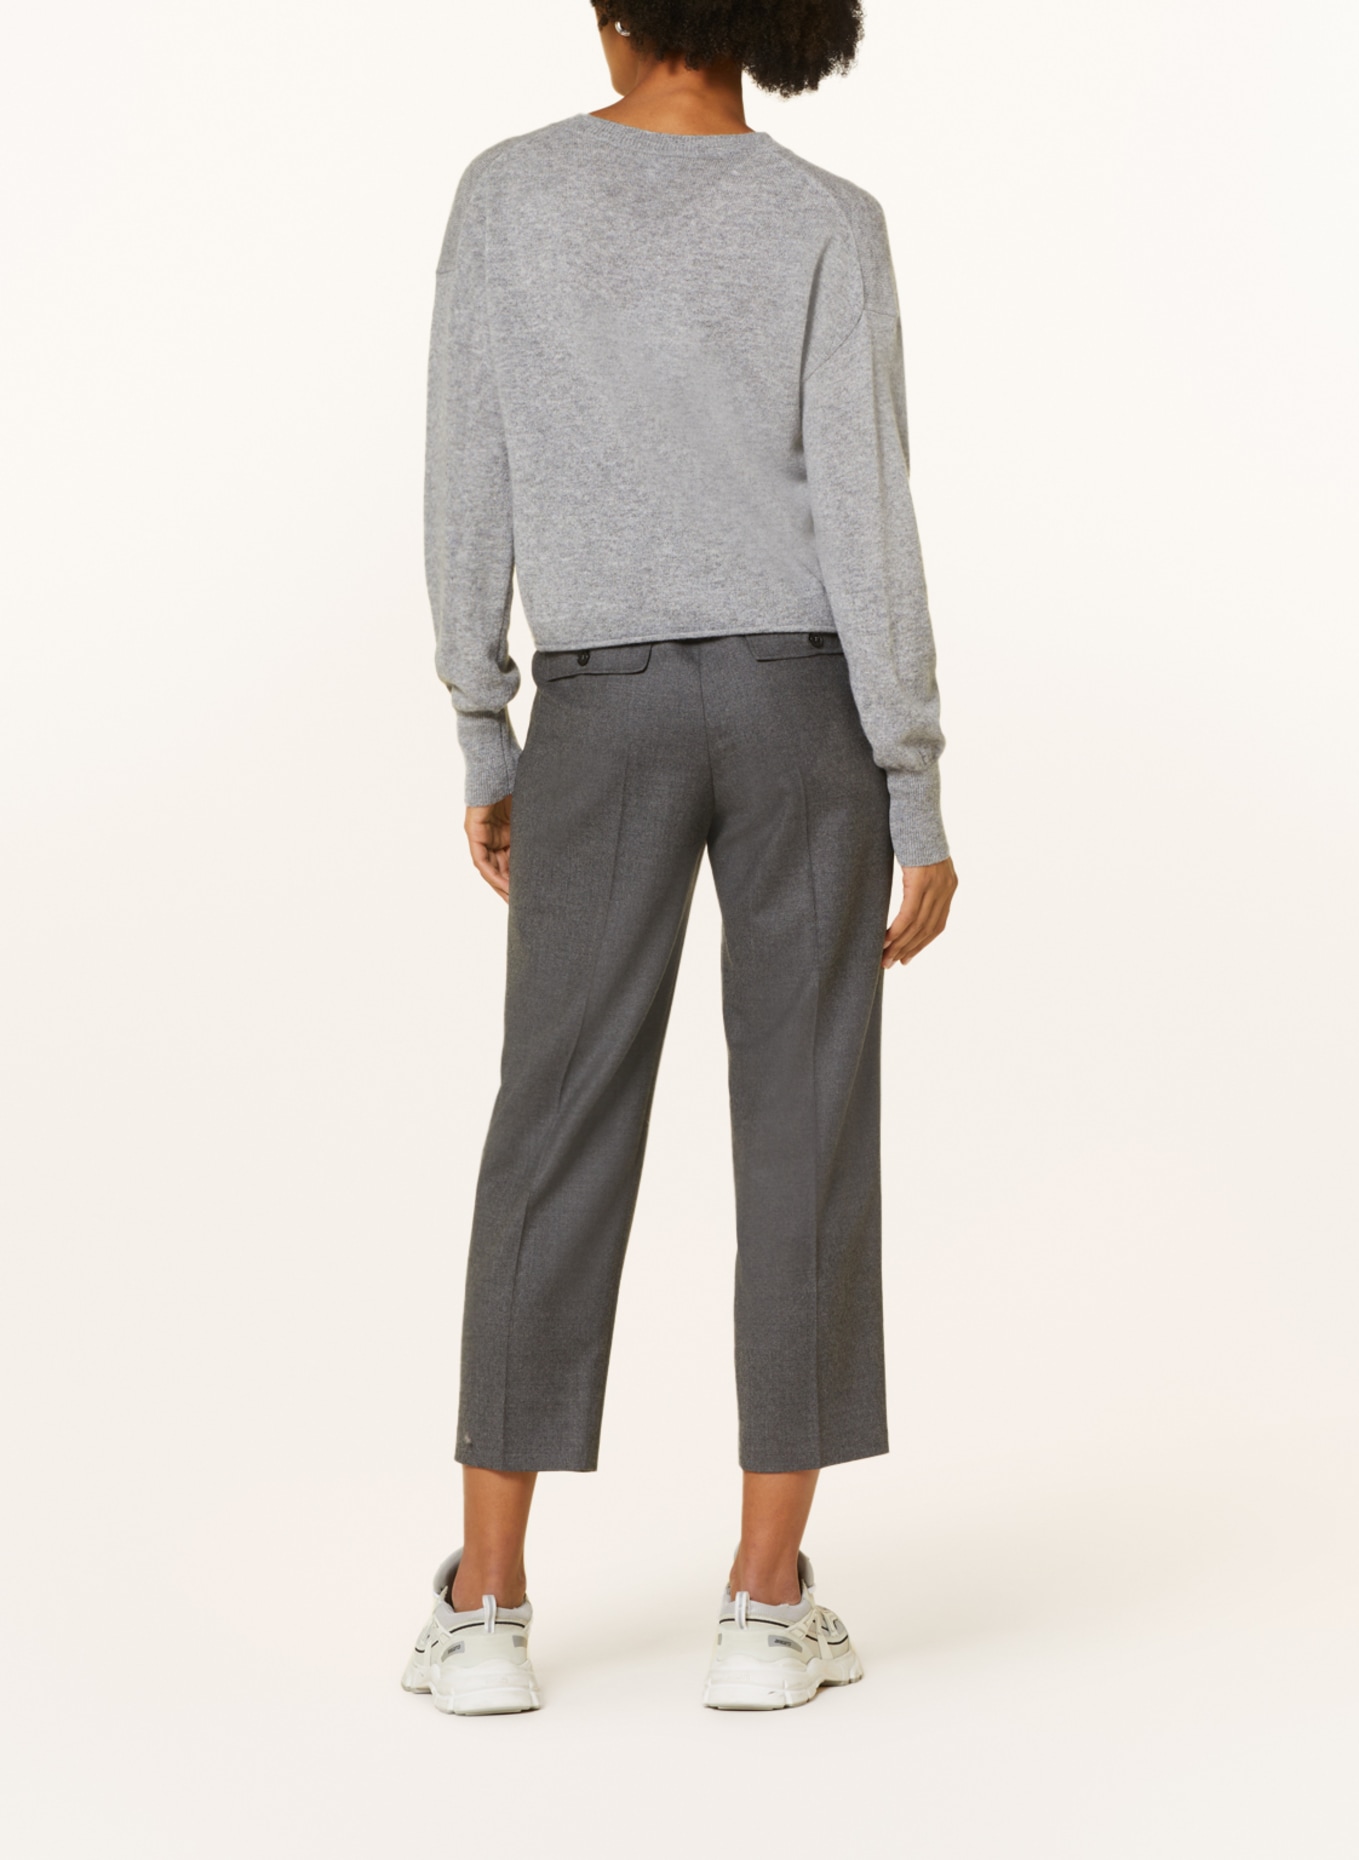 FTC CASHMERE Cashmere sweater, Color: GRAY (Image 3)